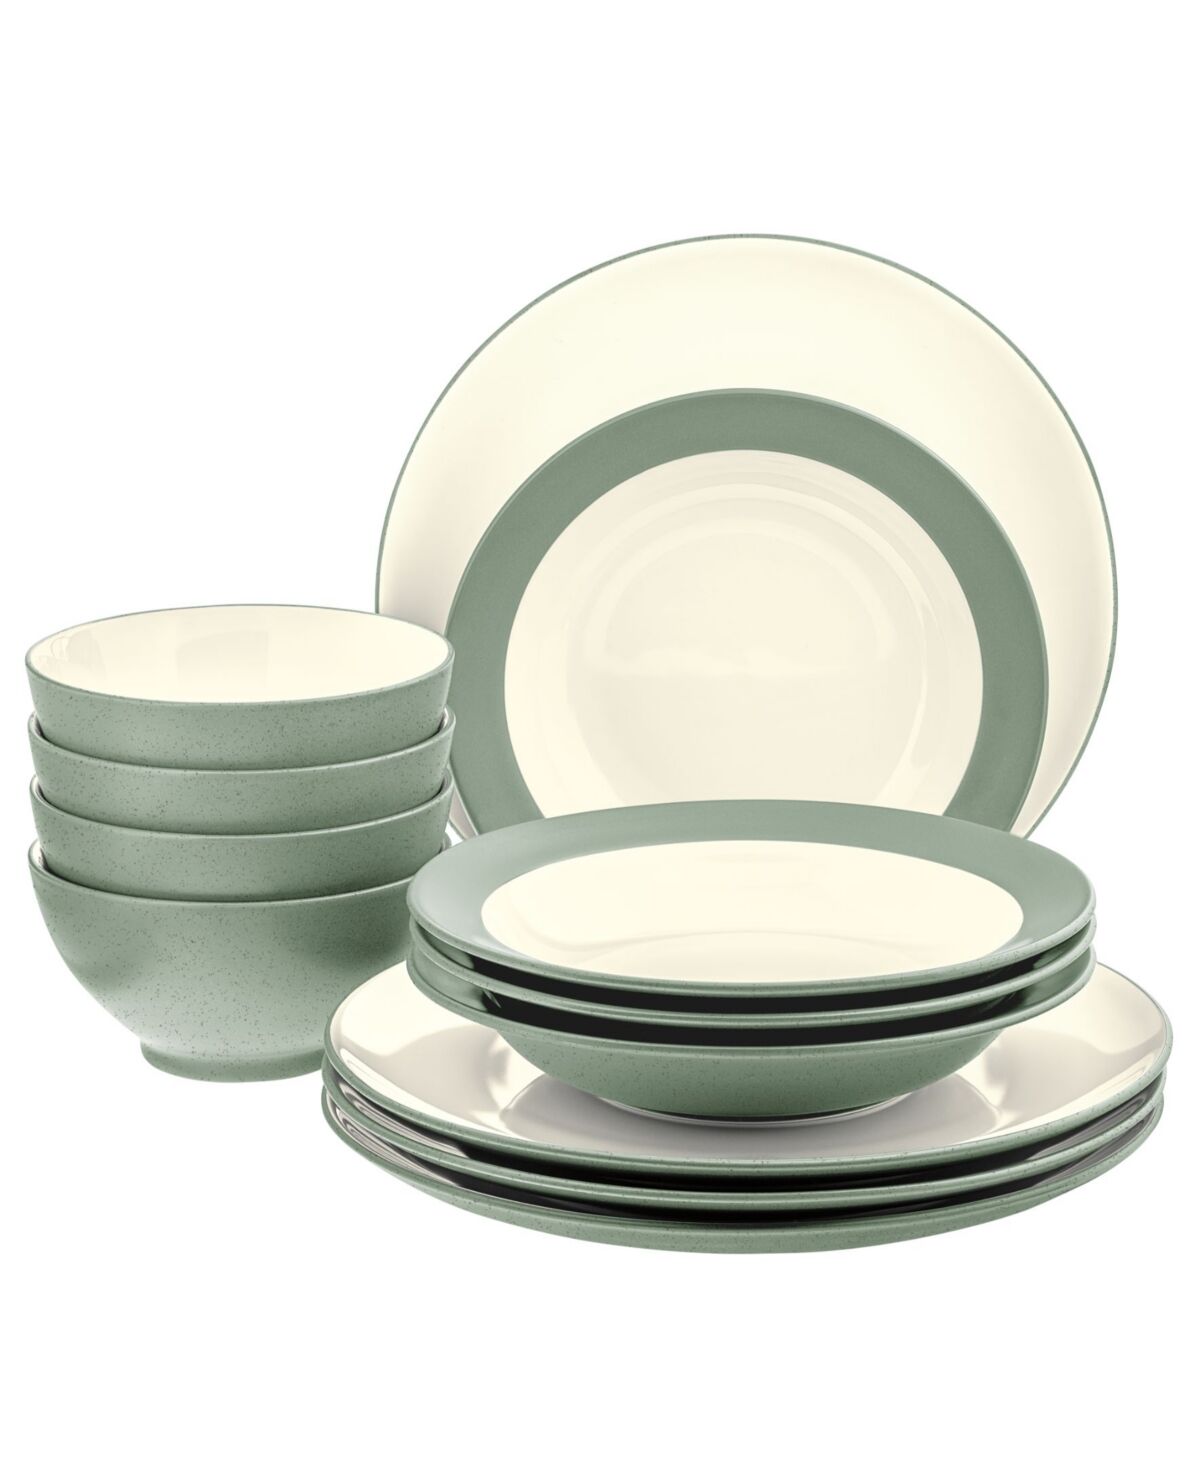 Noritake Colorwave Coupe 12-Piece Dinnerware Set, Service for 4, Created for Macy's - Green